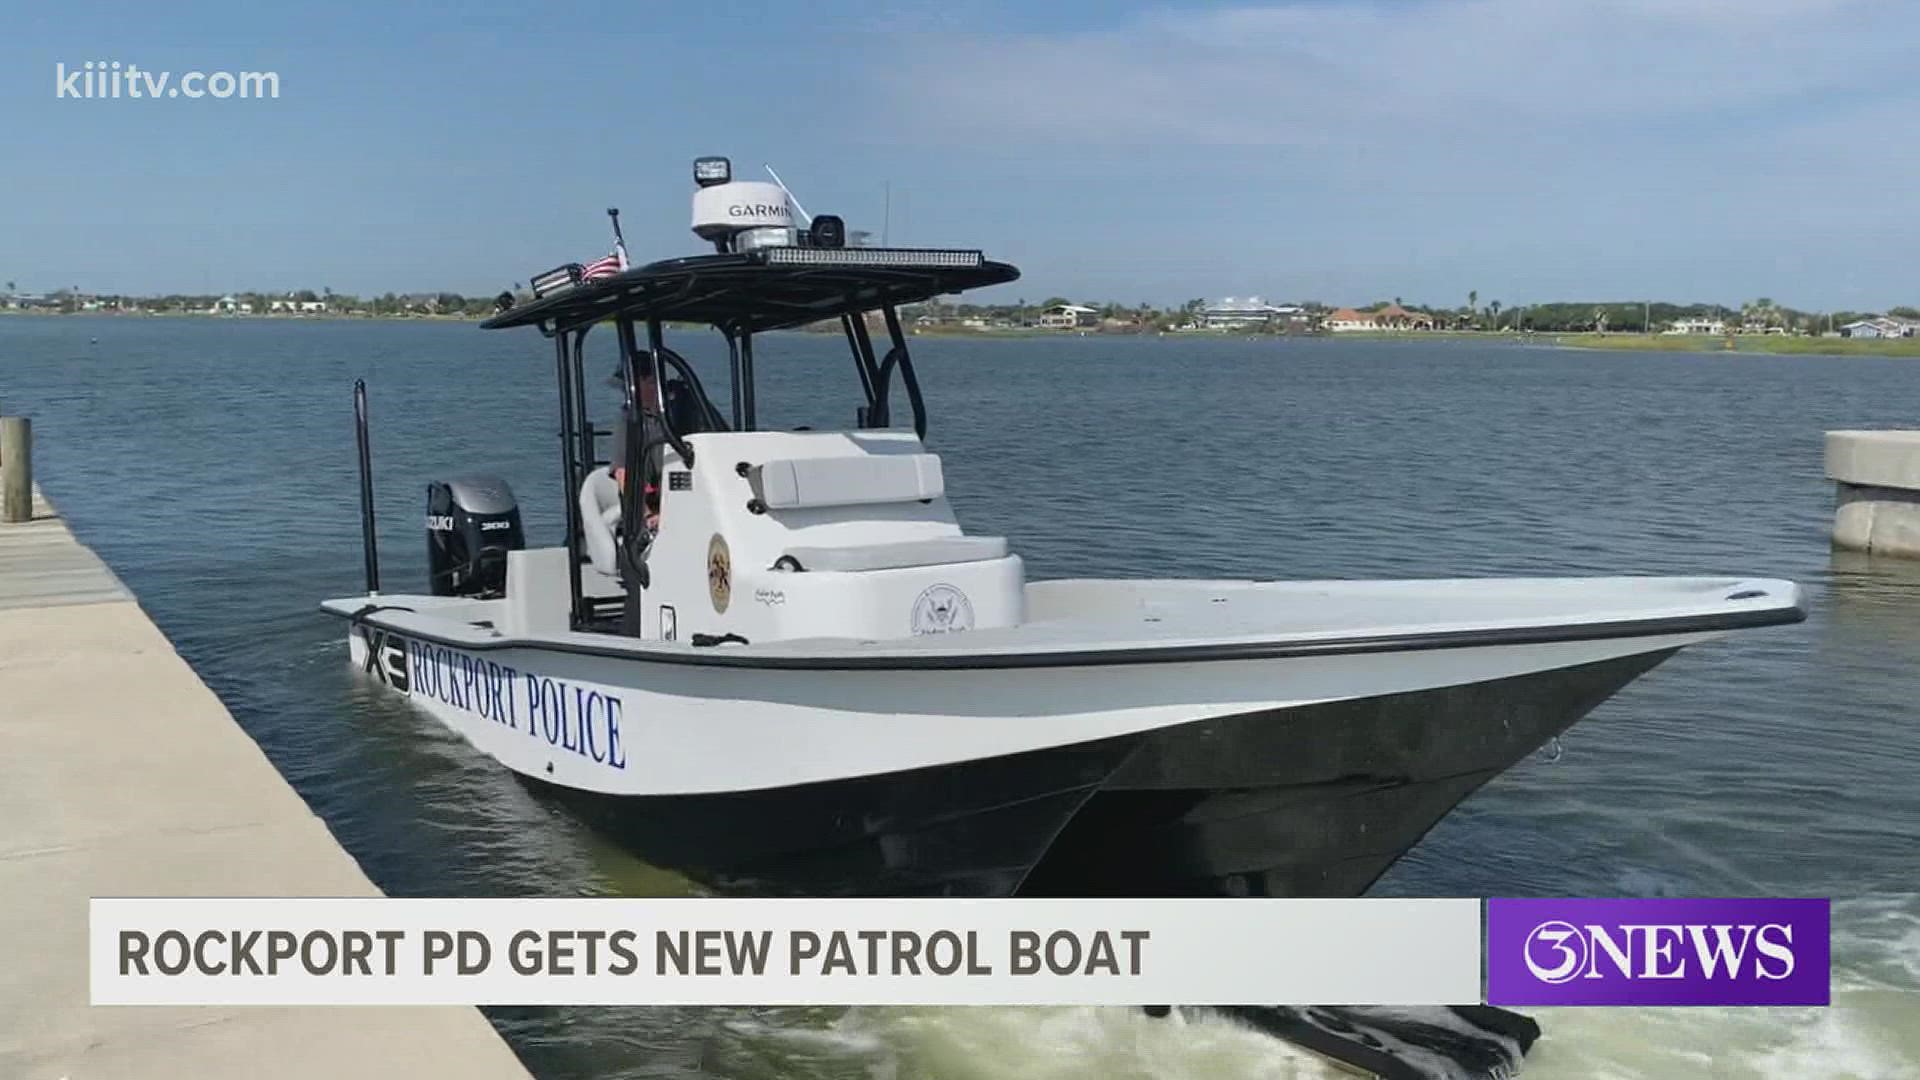 The department says they've been waiting several years to get a boat like this.